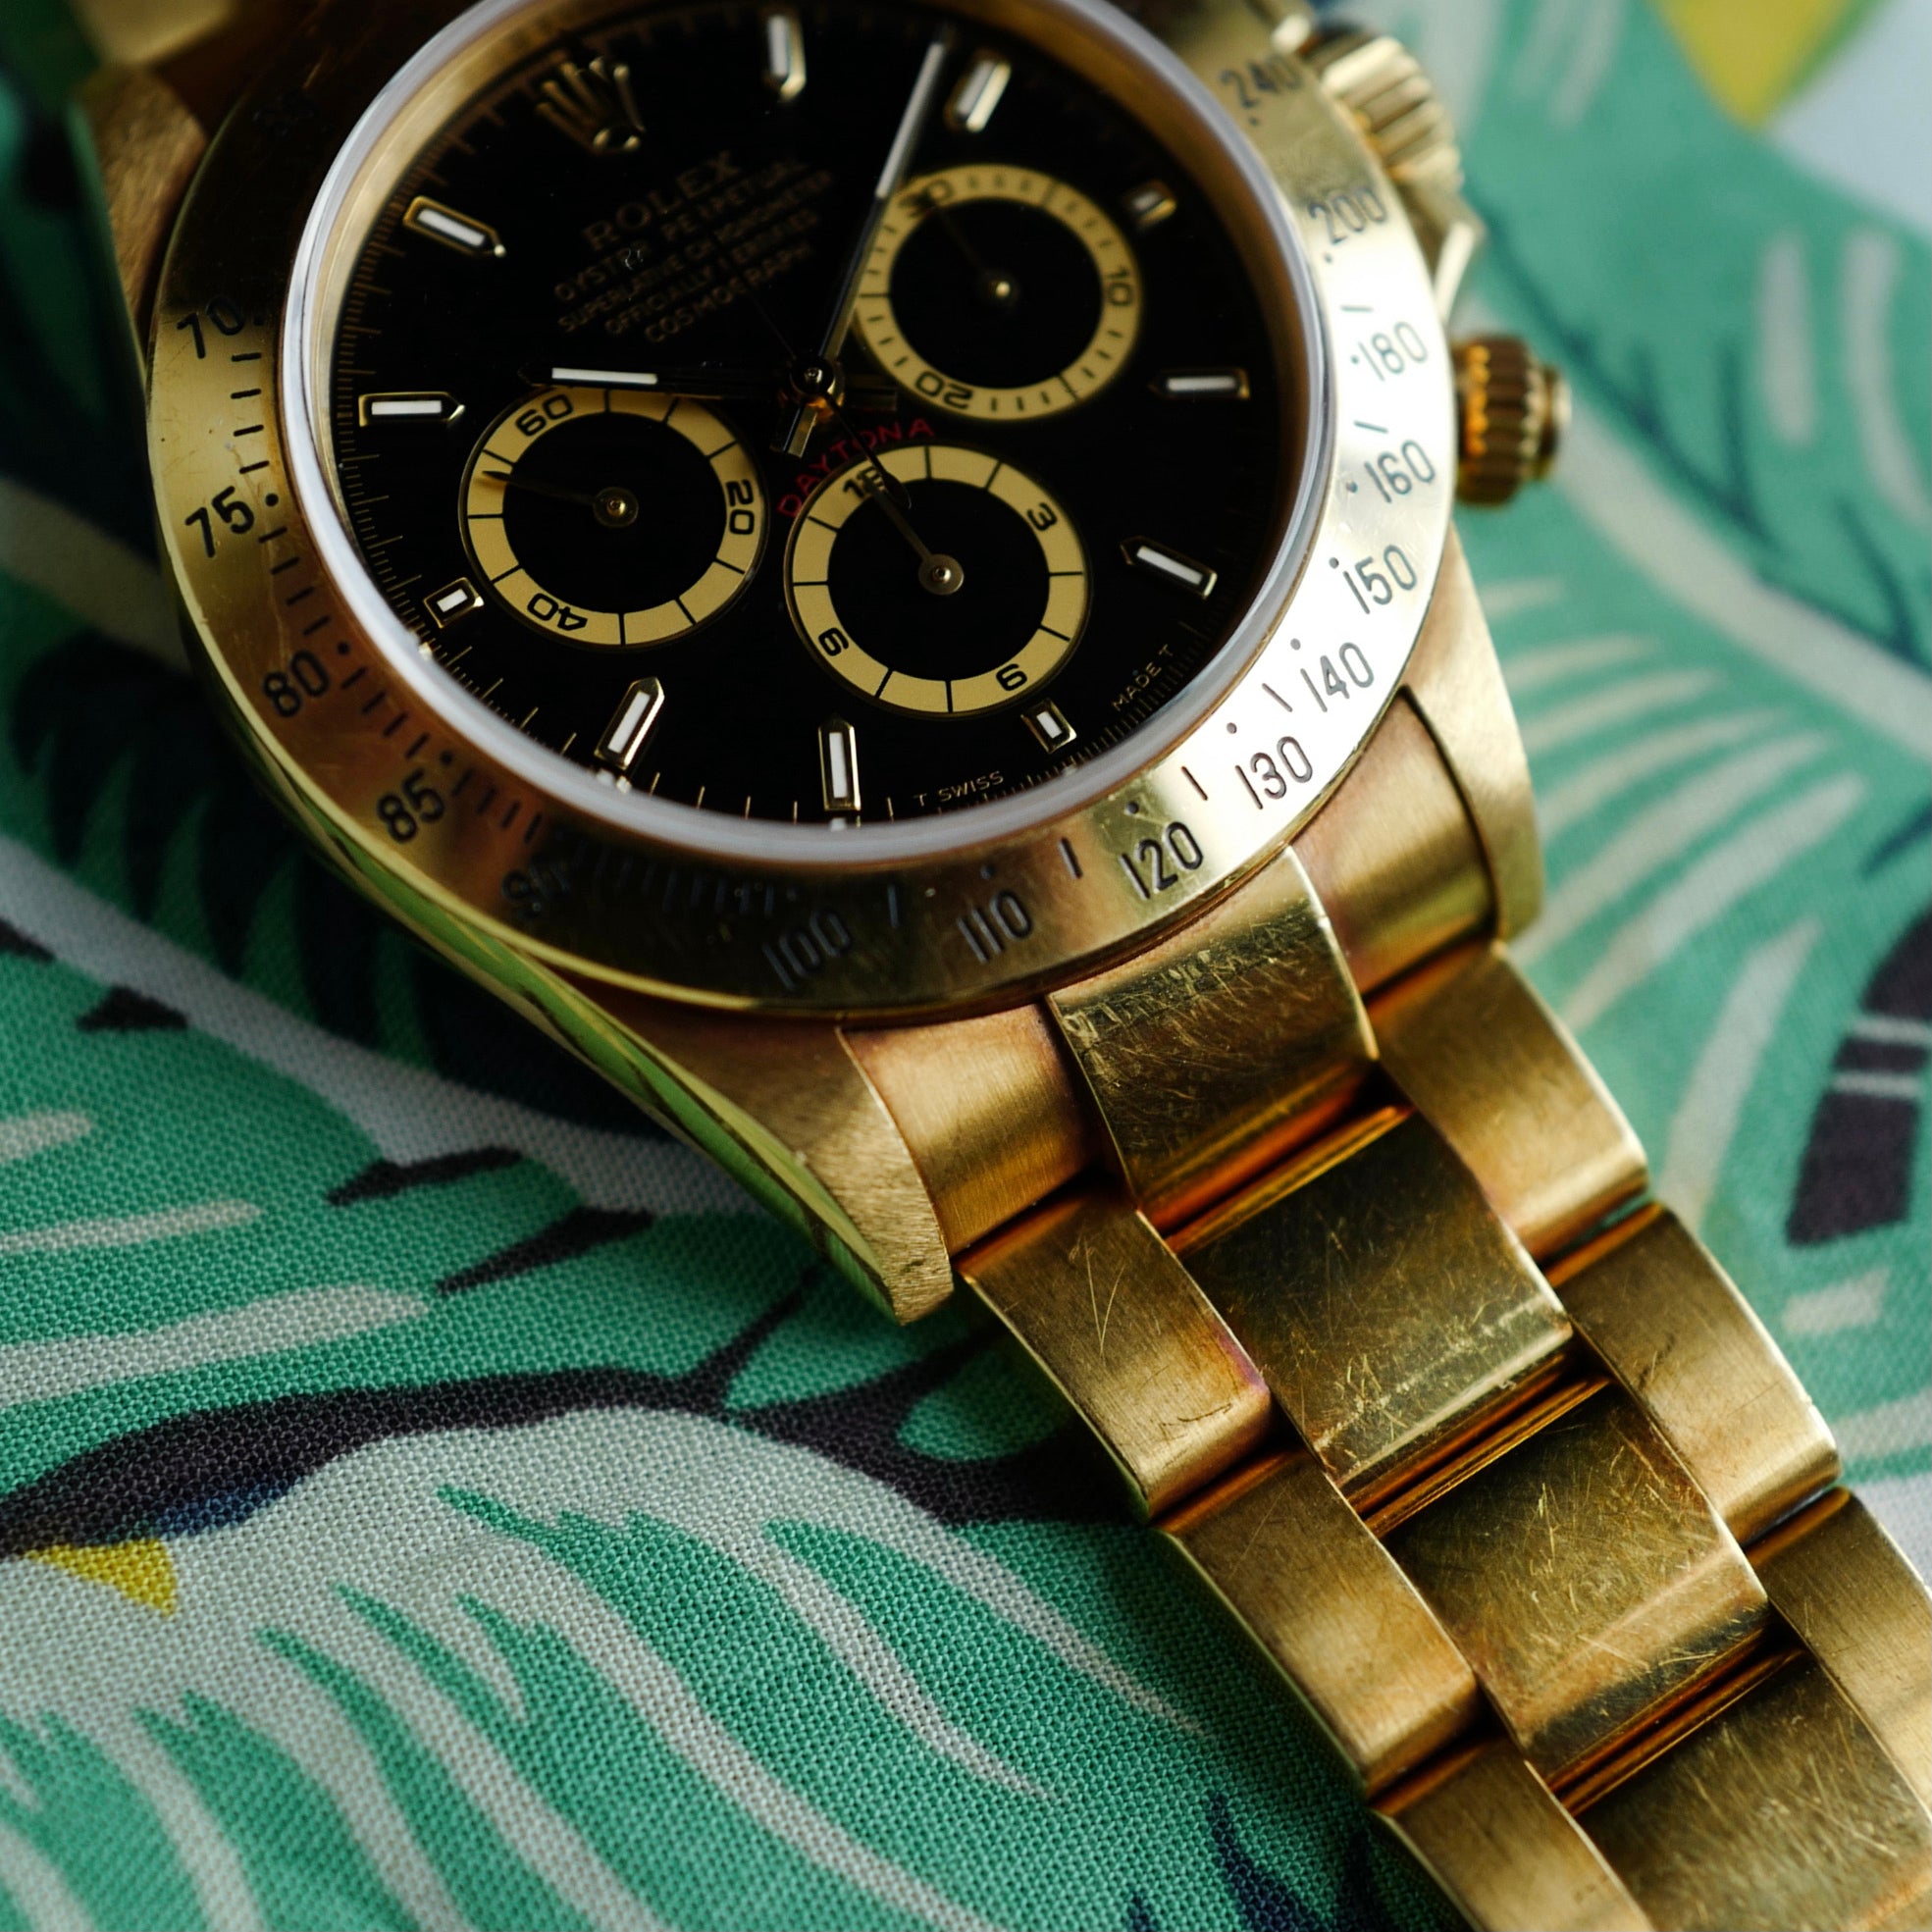 Rolex - Rolex Yellow Gold Cosmograph Daytona Ref. 16528 in Superb Condition - The Keystone Watches